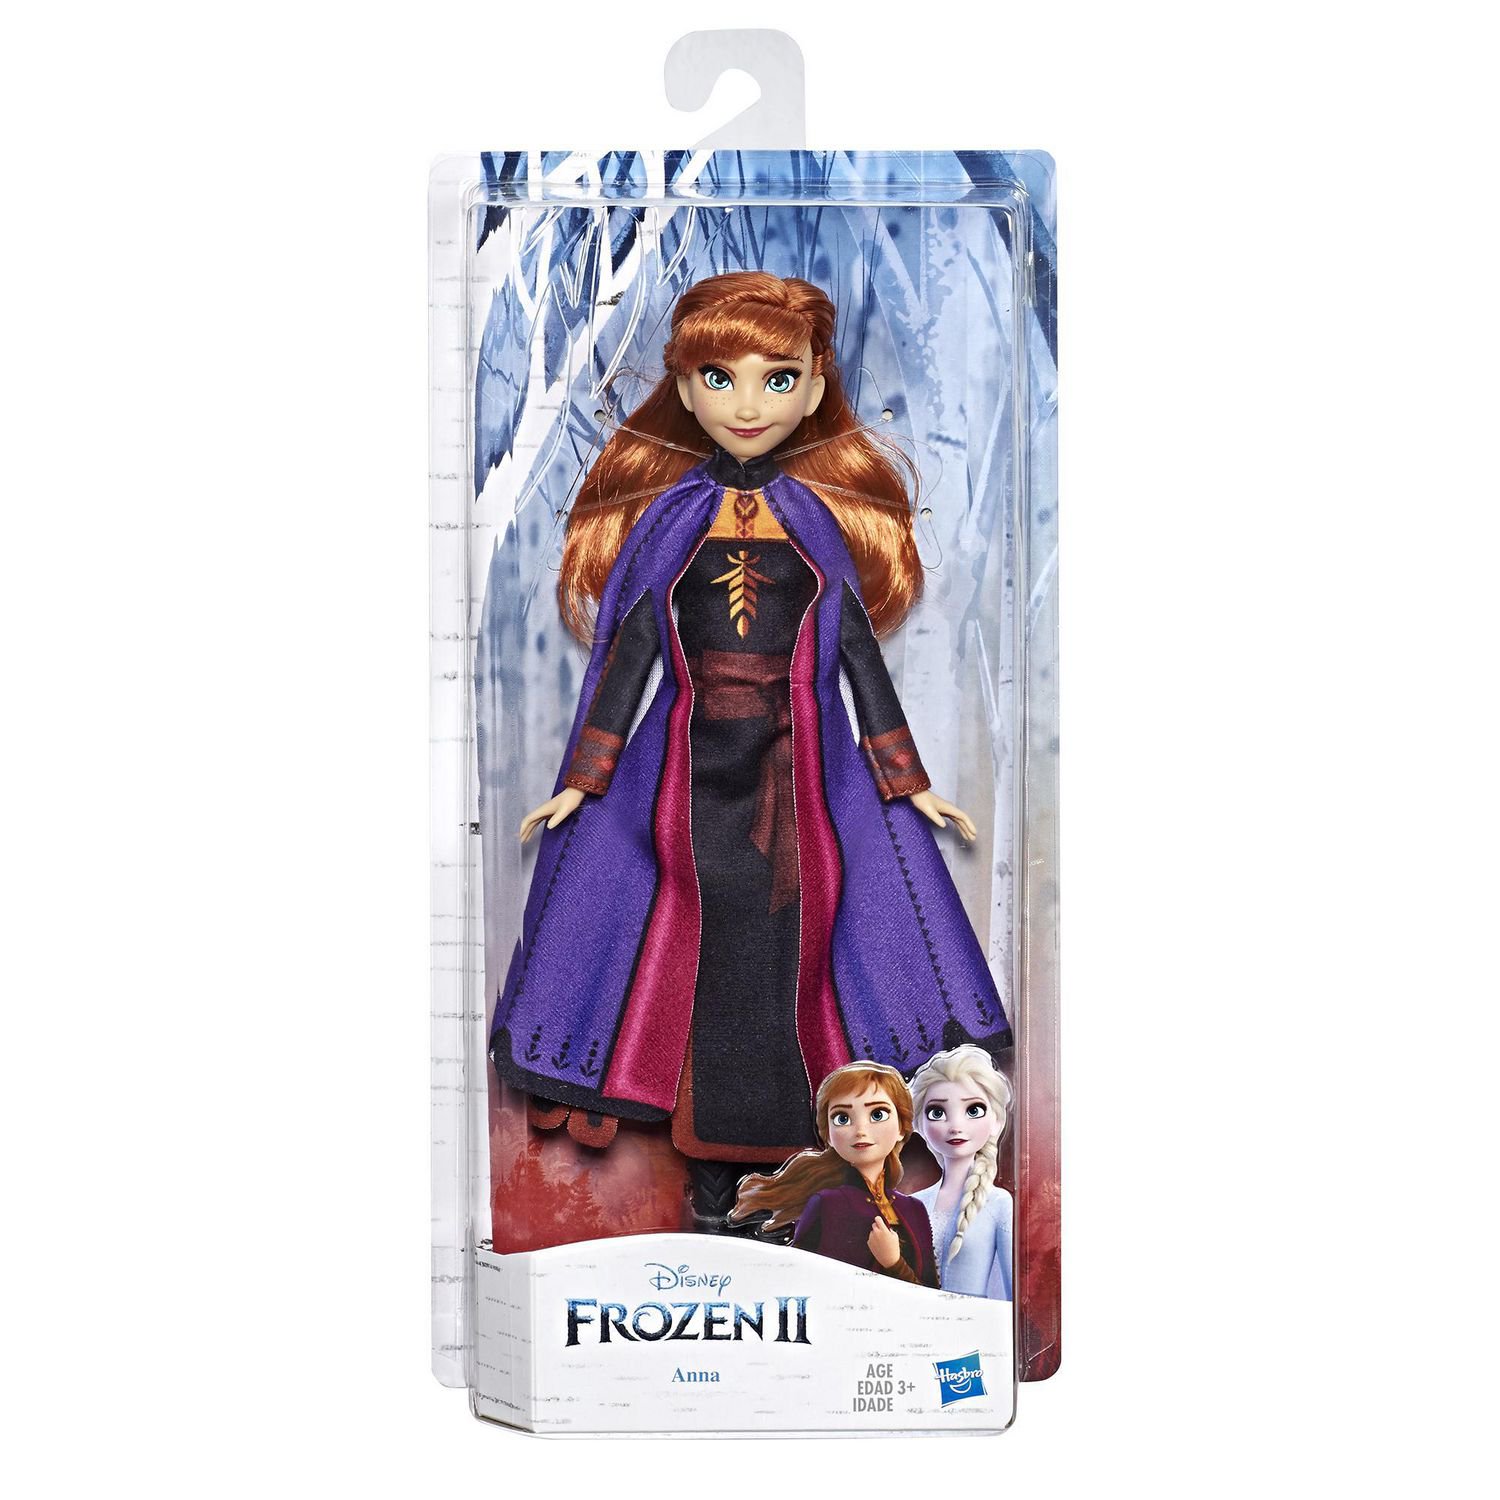 Disney Frozen Toys, Anna Fashion Doll and Accessories